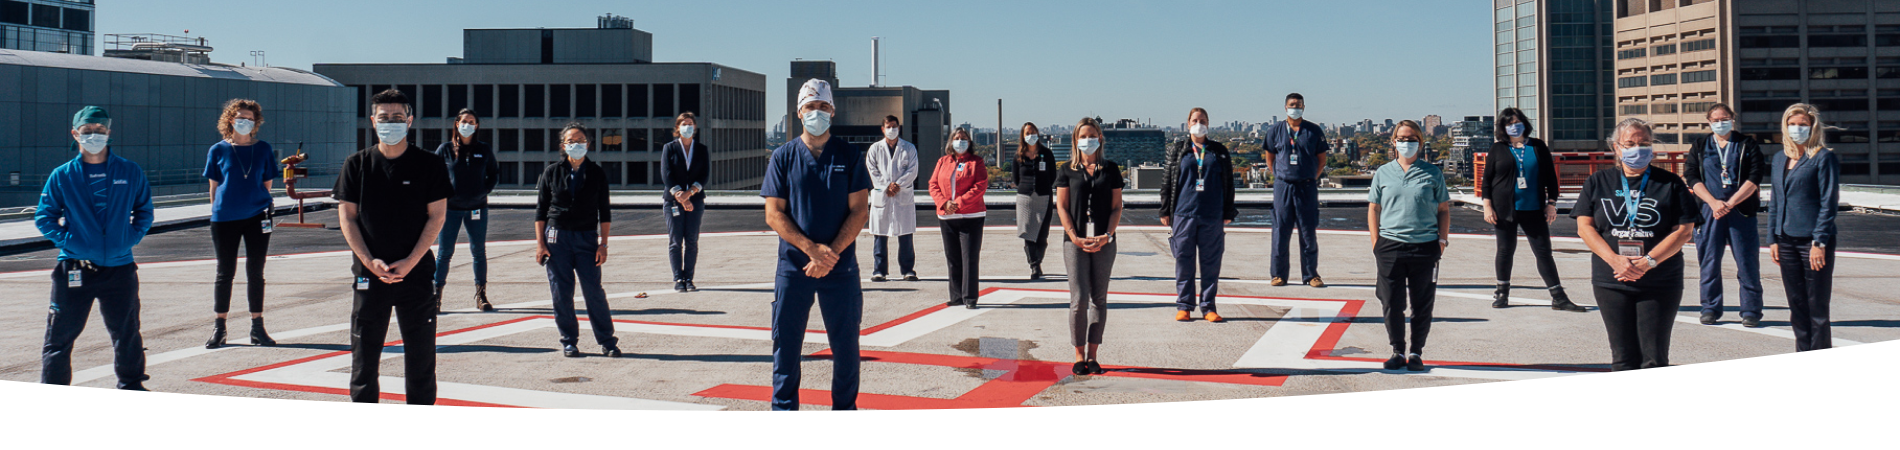 SickKids hospital workers standing on top of the emergency helicopter pad.